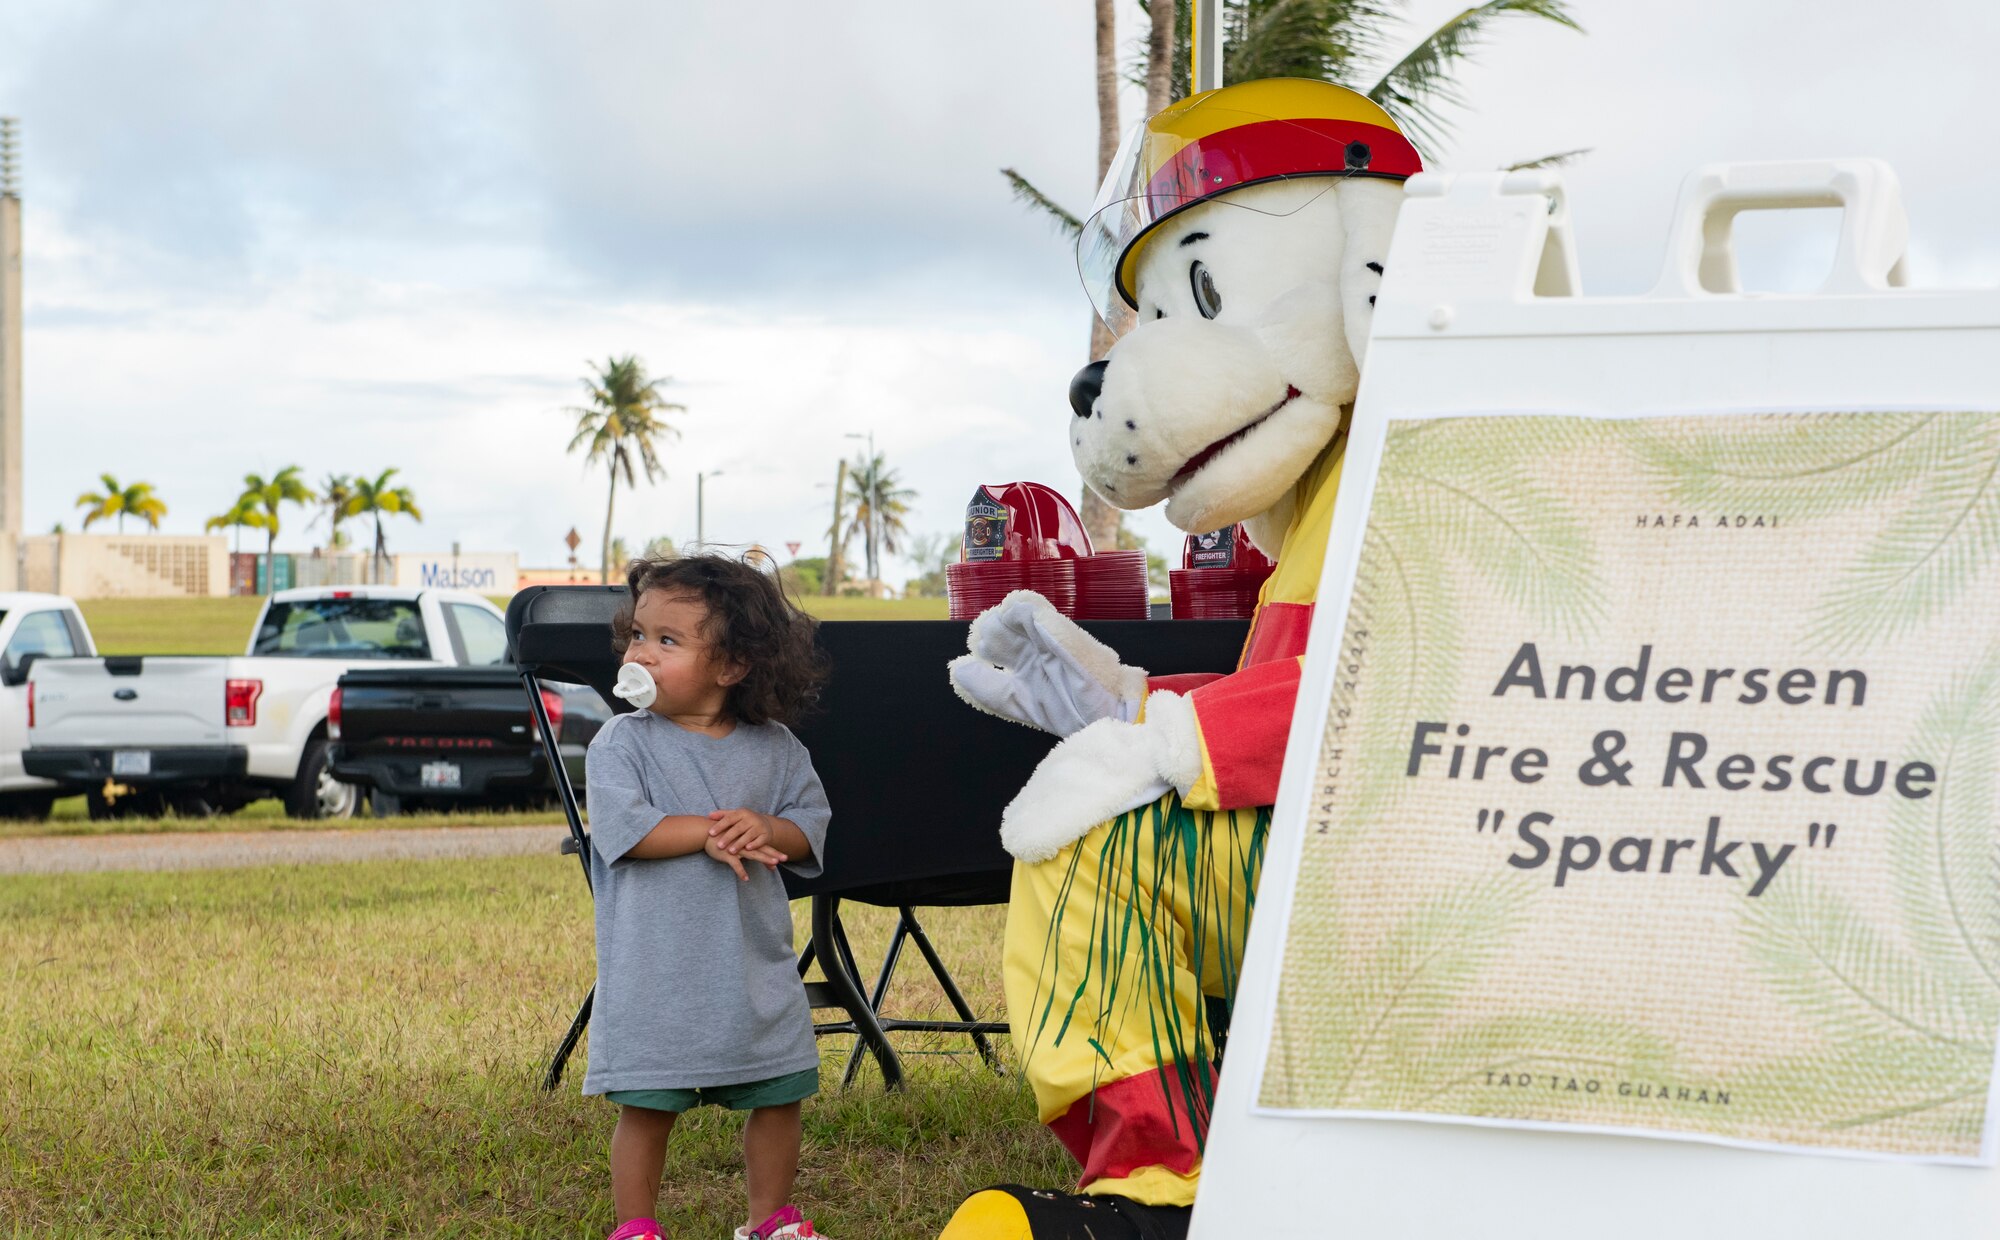 Sparky the dog poses for a photo with a Team Andersen child during the annual Tao Tao Guahan event March 12, 2022, at Andersen Air Force Base, Guam. The event focused on immersing Team Andersen members in the local culture of Guam and strengthen the partnerships of the two communities. The event included booths, cultural music and dance, storytelling, food and more. (U.S. Air Force Photo by Senior Airman Helena Owens)